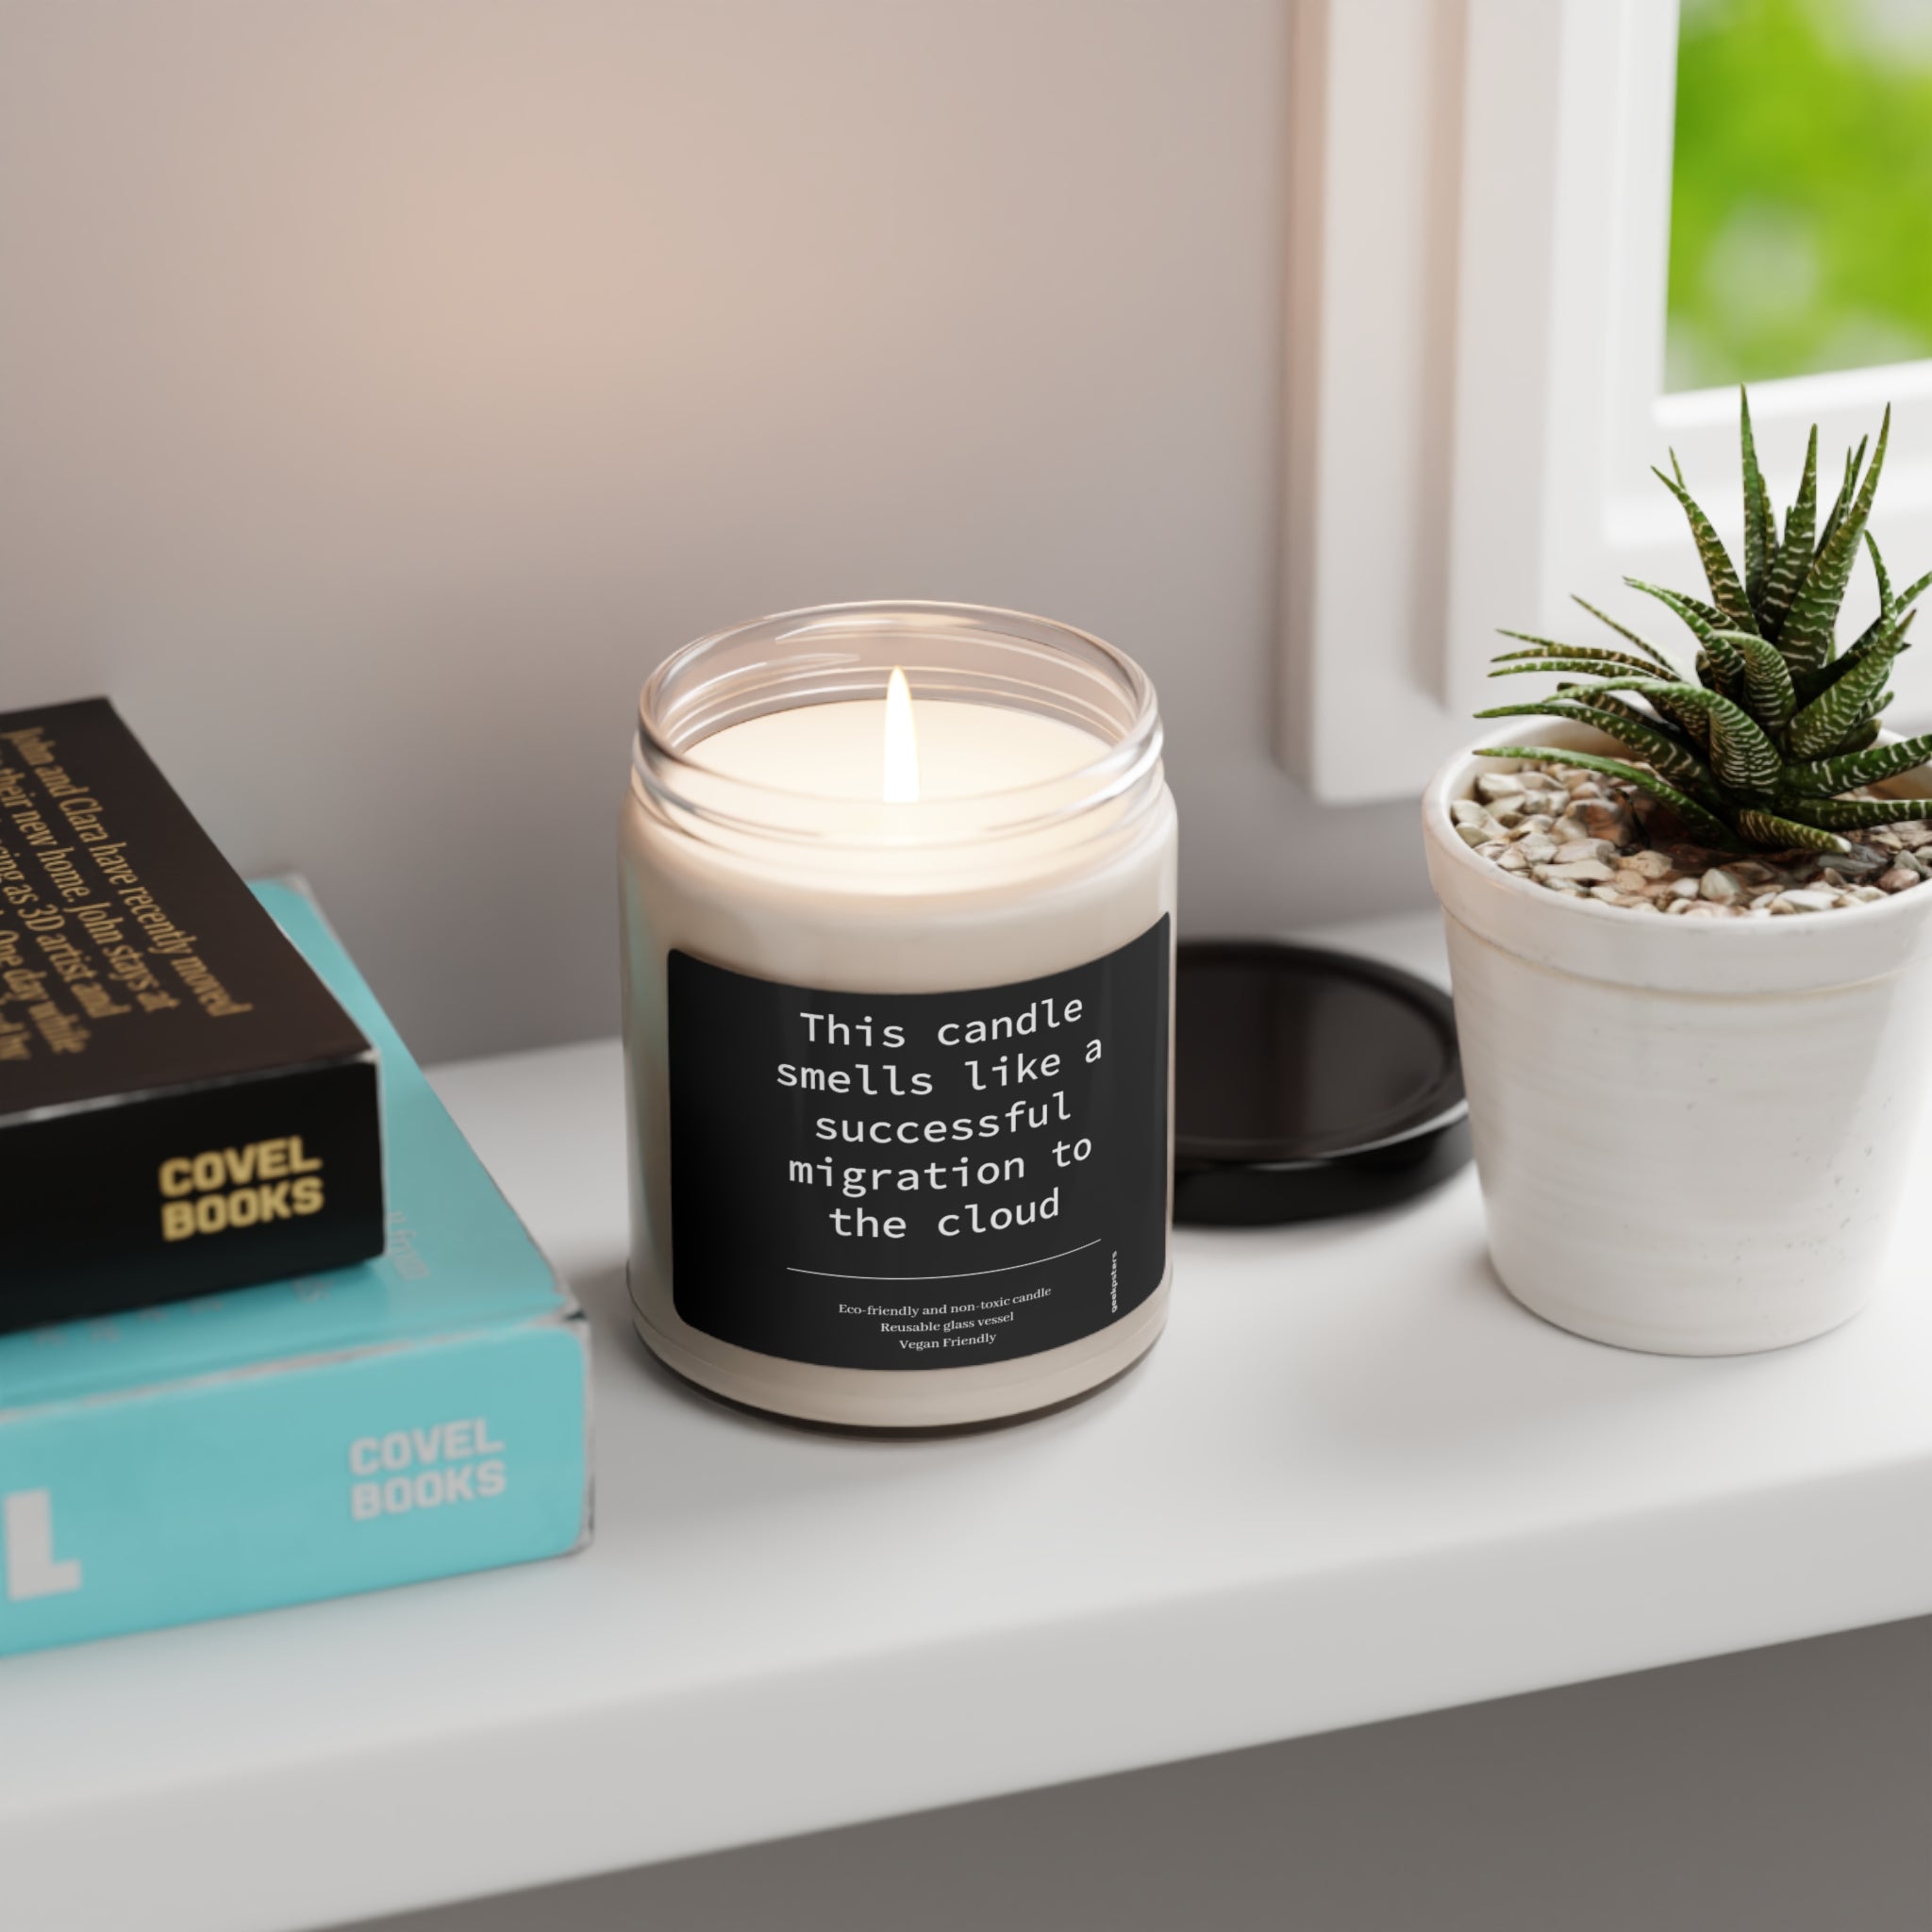 A lit scented candle made from a natural soy wax blend labeled "Scented Soy Candle, 9oz" placed beside a stack of books and a potted succulent on a windowsill.